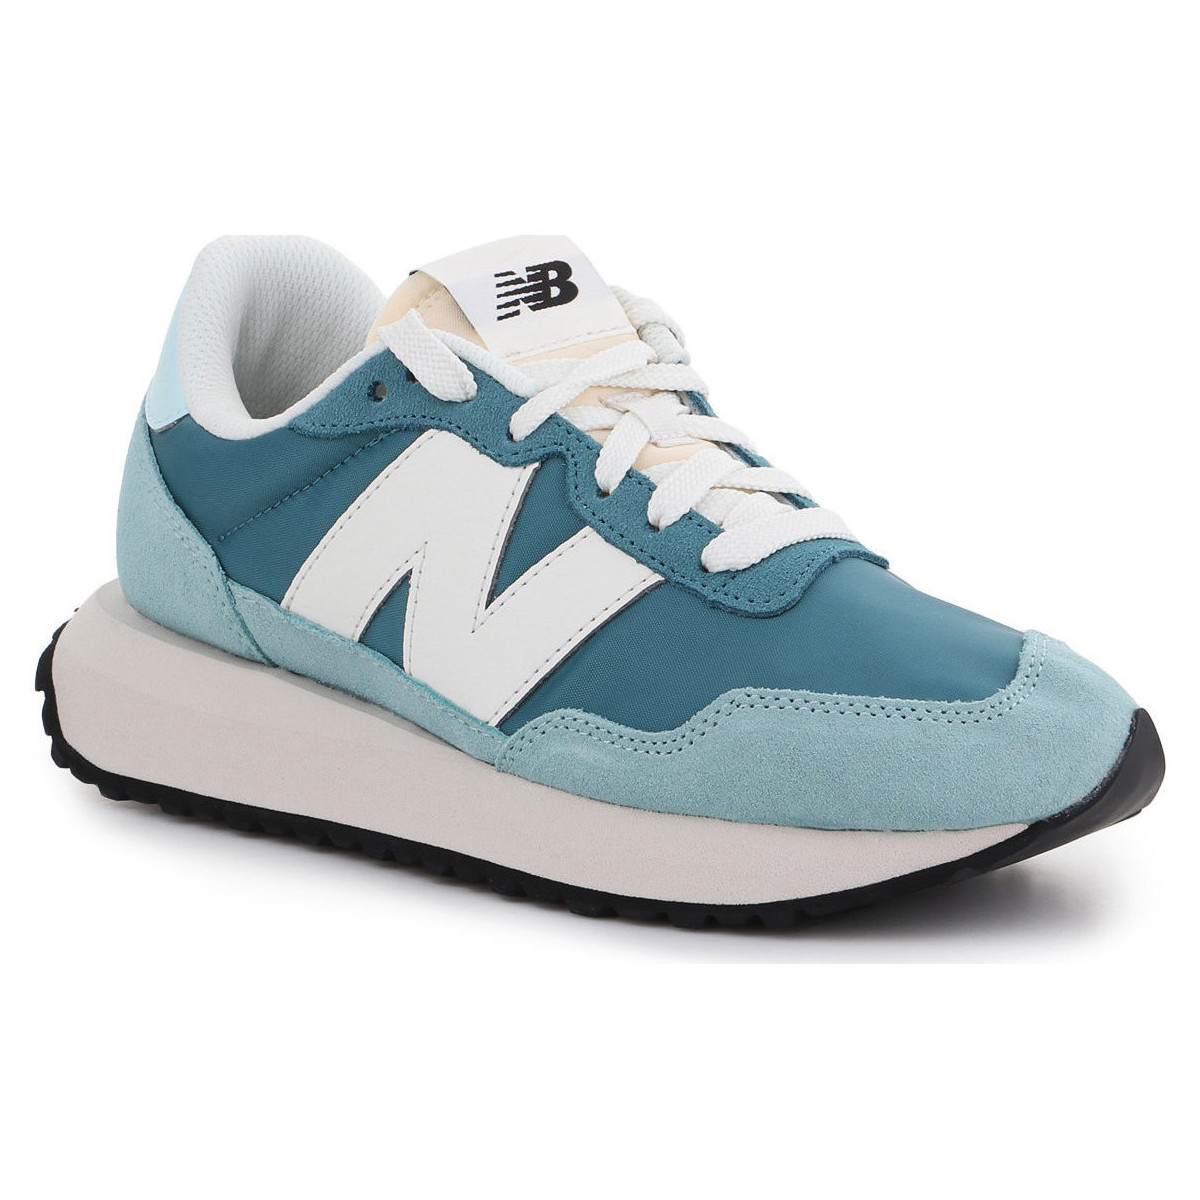 Zapatos Mujer Fitness / Training New Balance Wmns Shoes WS237DI1 Azul